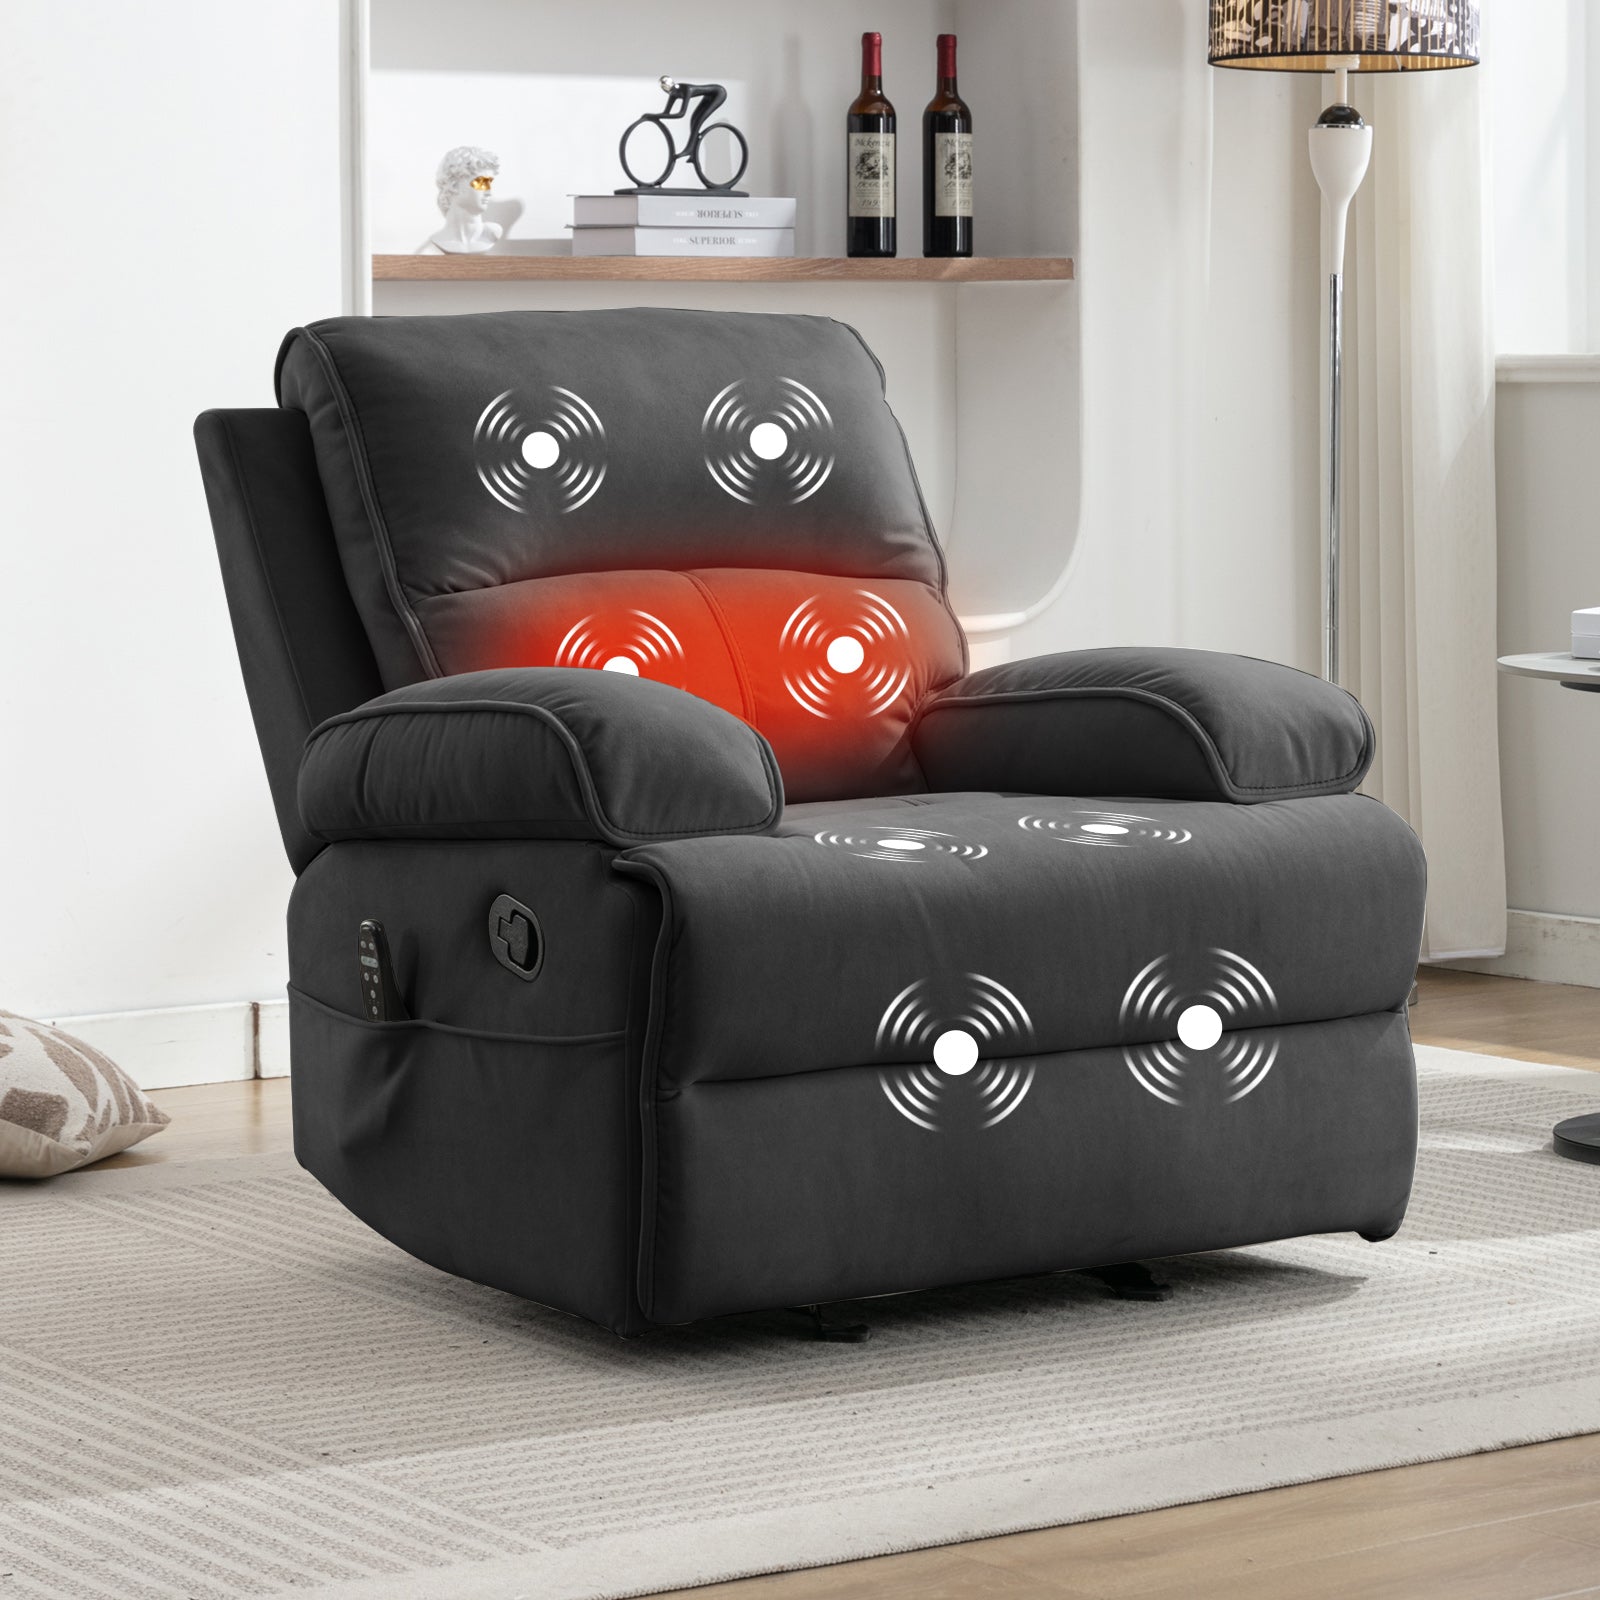 Mjkone Recliner Chair for Adults, Baby Velour Fabric Reclining Sofa Chair with Heat Vibration Function, Lazy Sofa Lift Chair, Oversized Glider Massage Chair for Living Room, Bedroom, Office